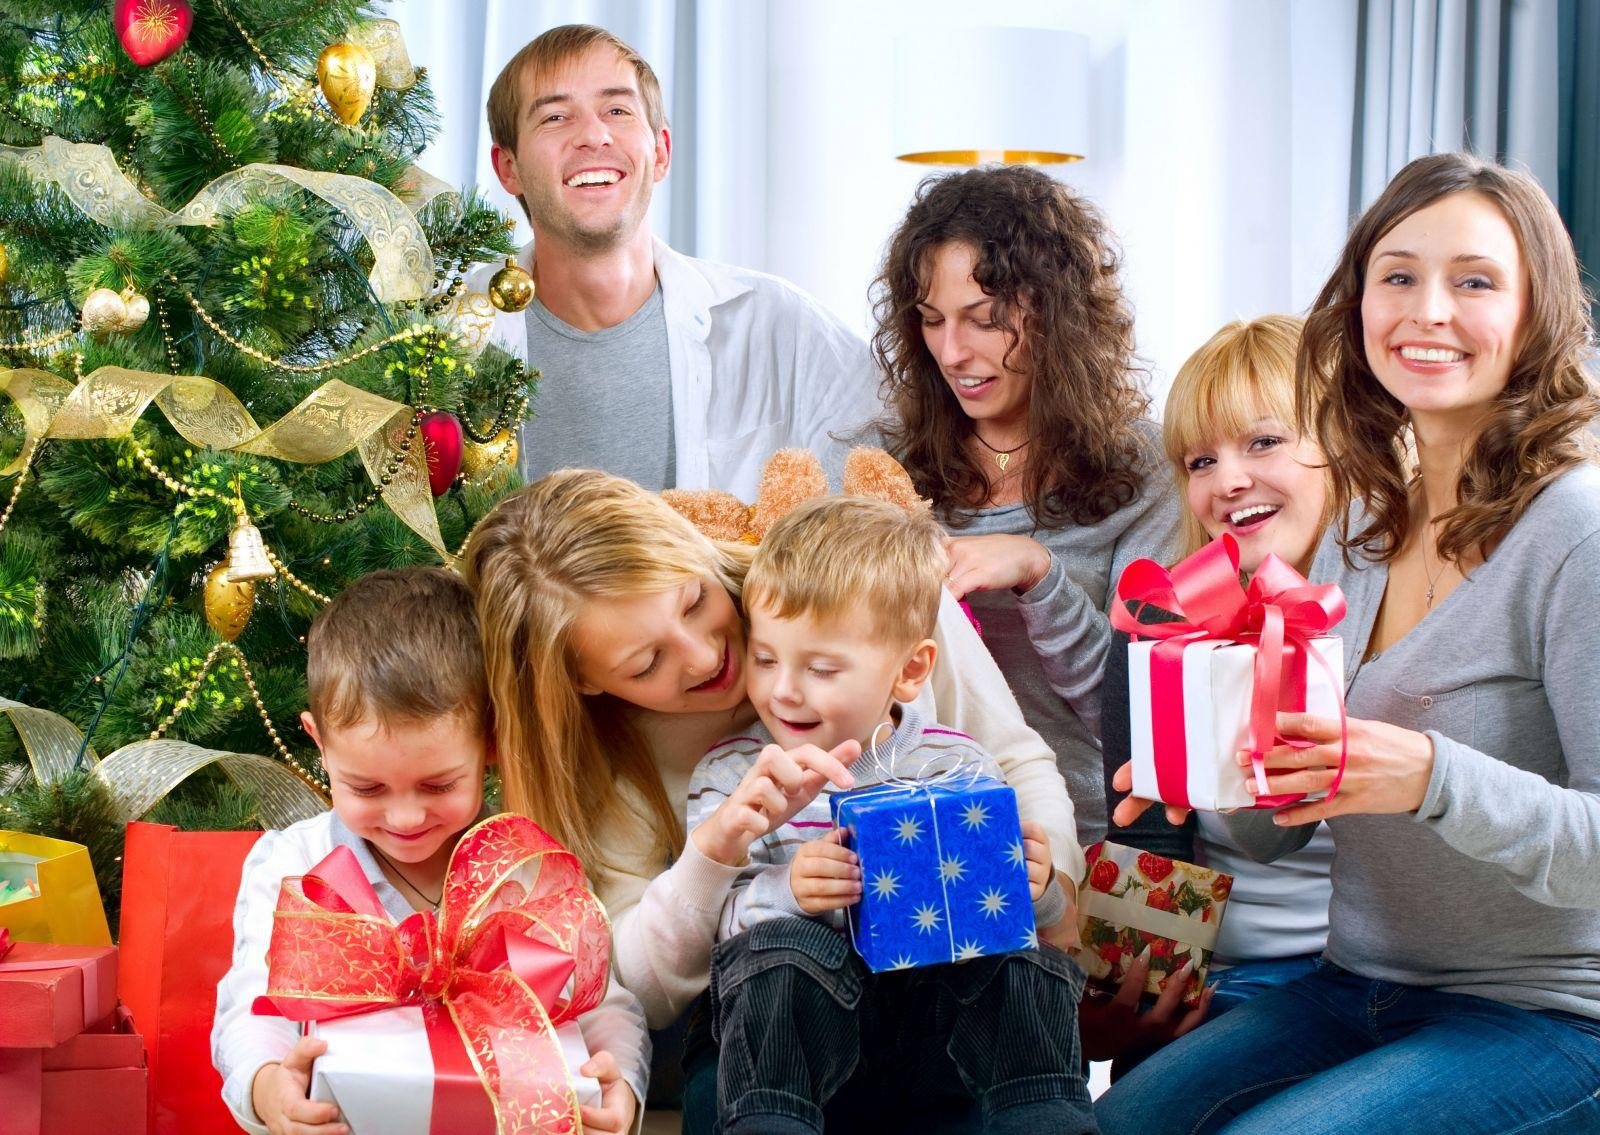 Fun games for the New Year with your family without